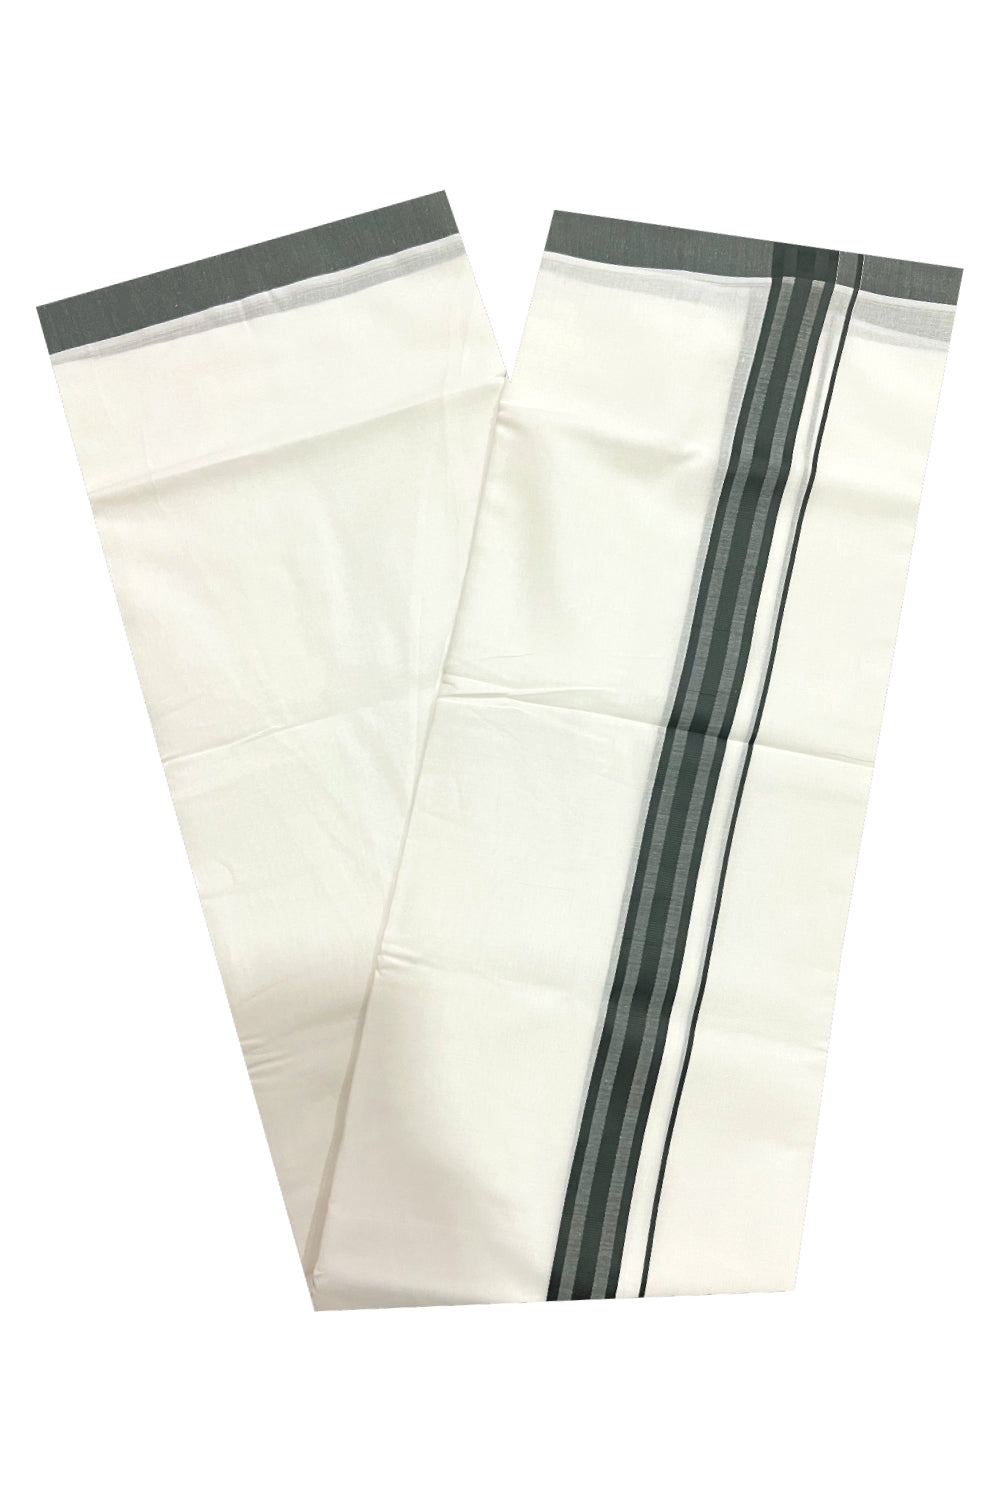 Pure White Cotton Double Mundu with Greenish Grey Line Border (South Indian Dhoti)